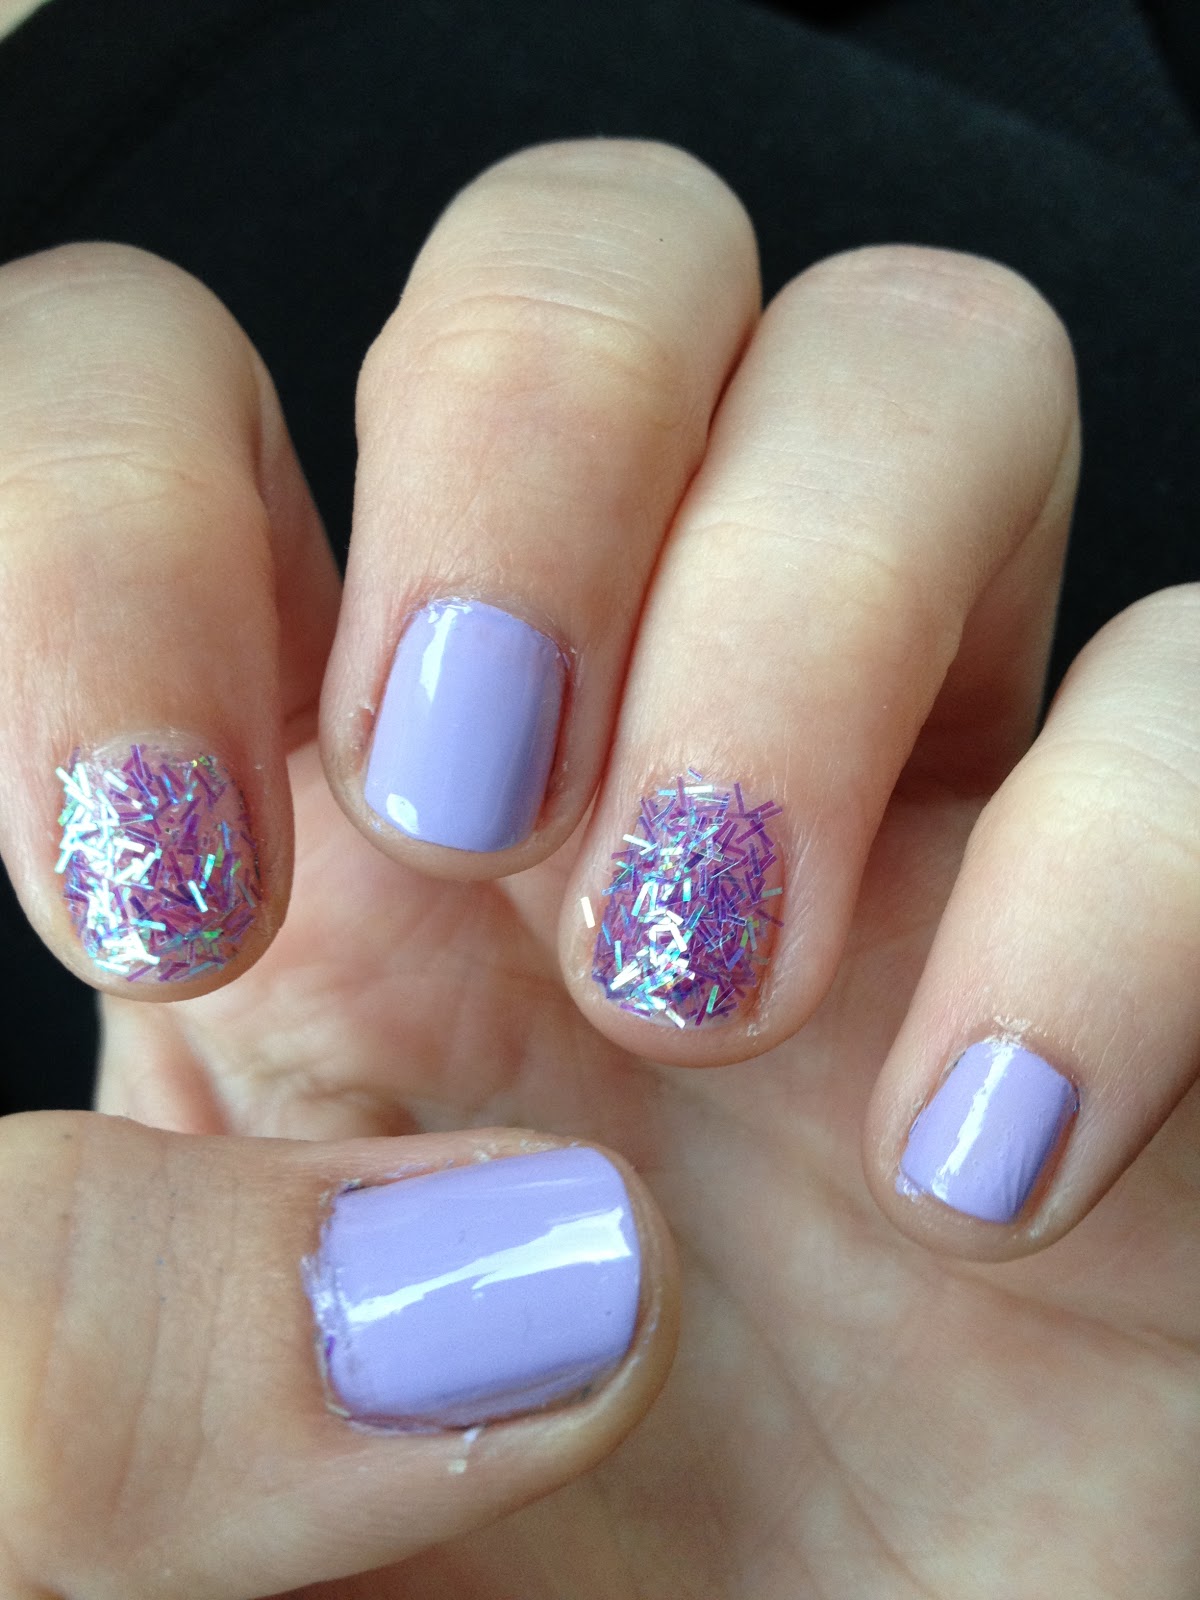 Miscellaneous Manicures: Two Glitter Manicures - Maynicure Challenge #4